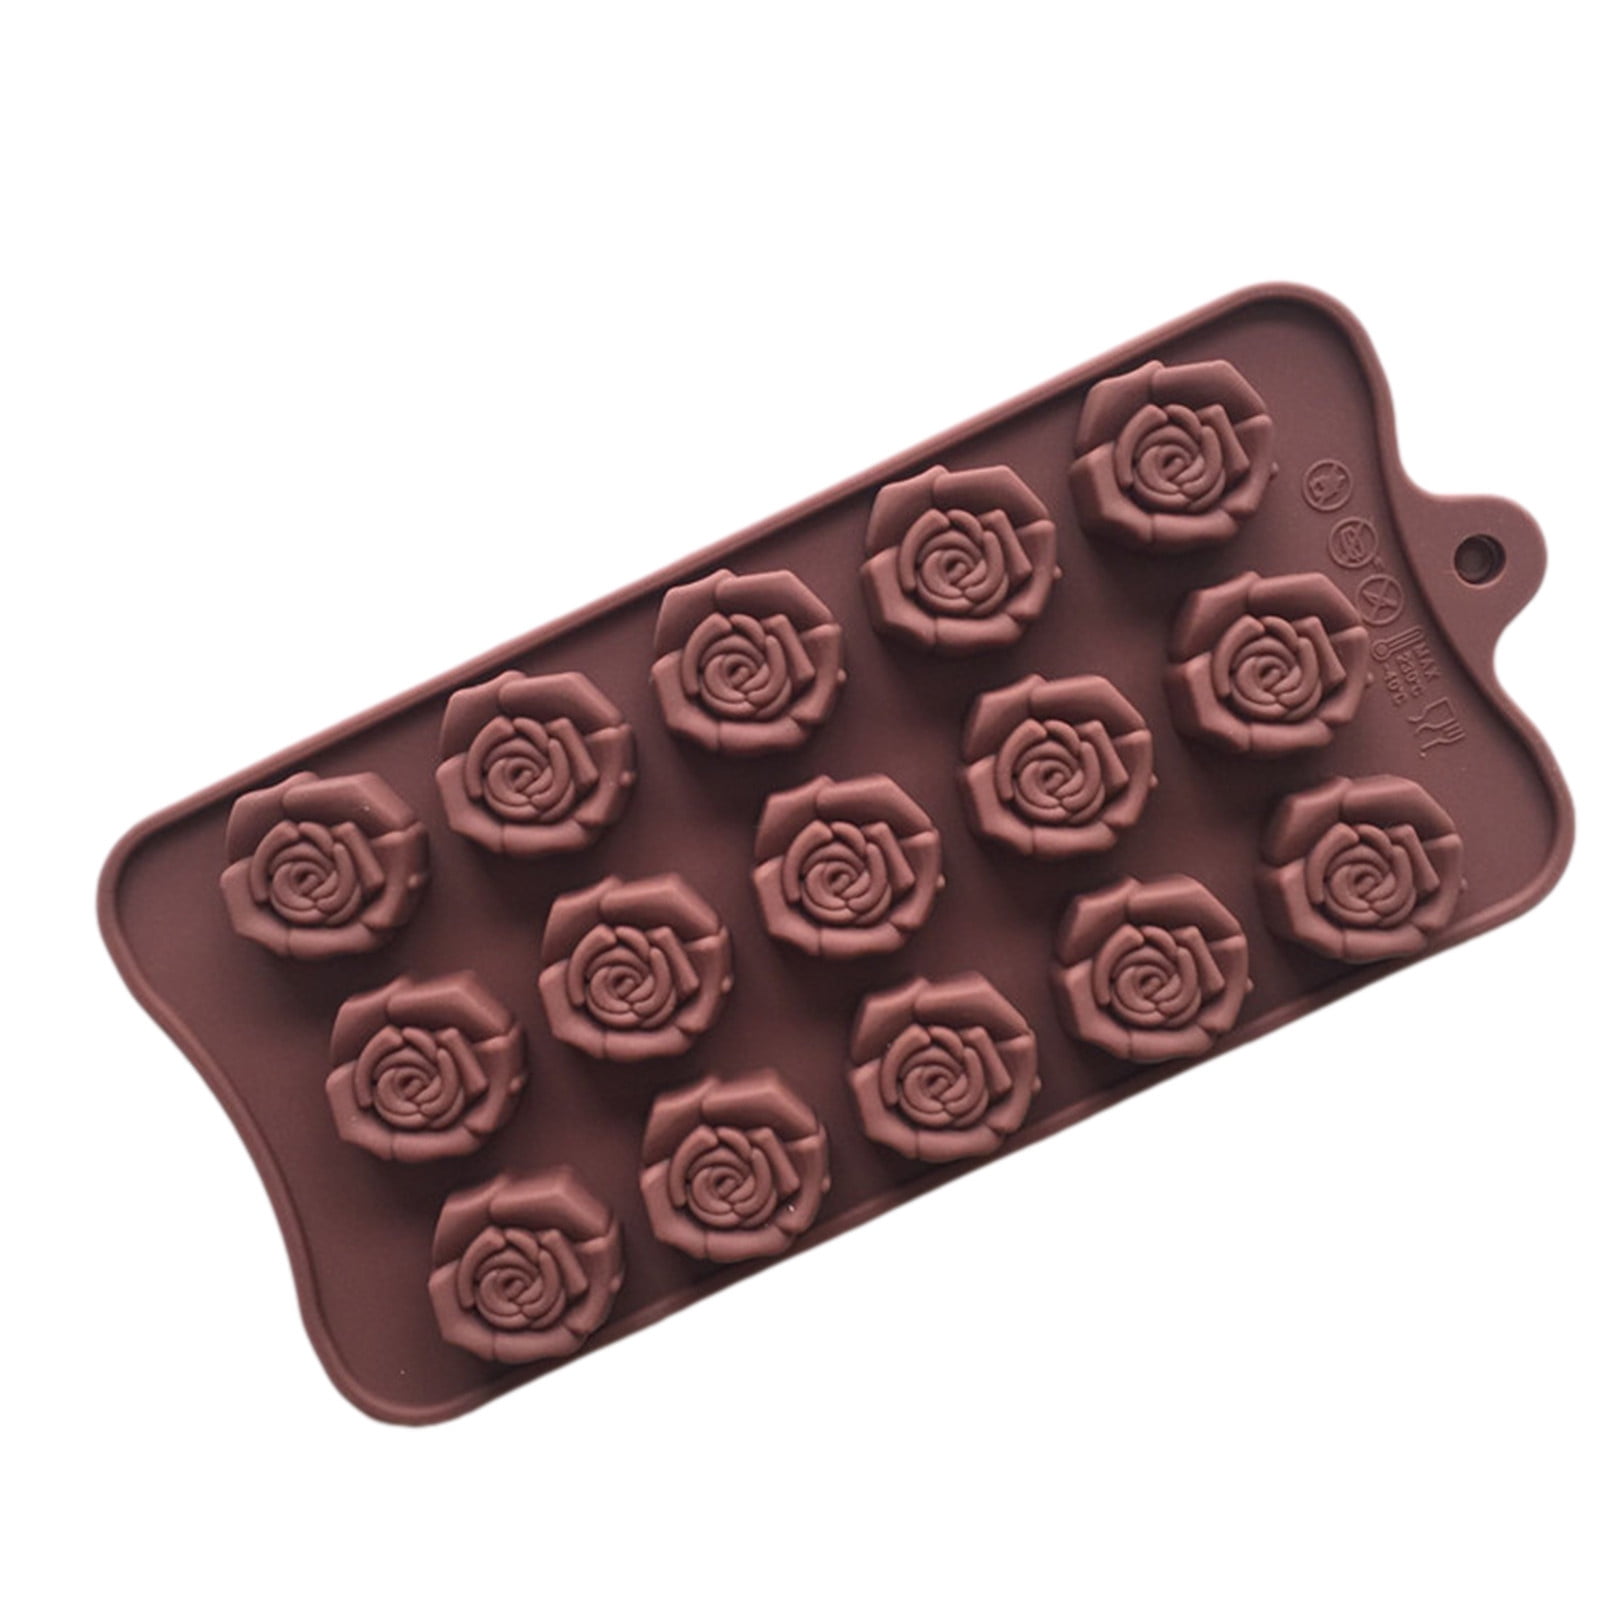 15-Cavity Silicone Chocolate Moulds Heart,Rose,Flower Shapes Cake Chocolate  mold